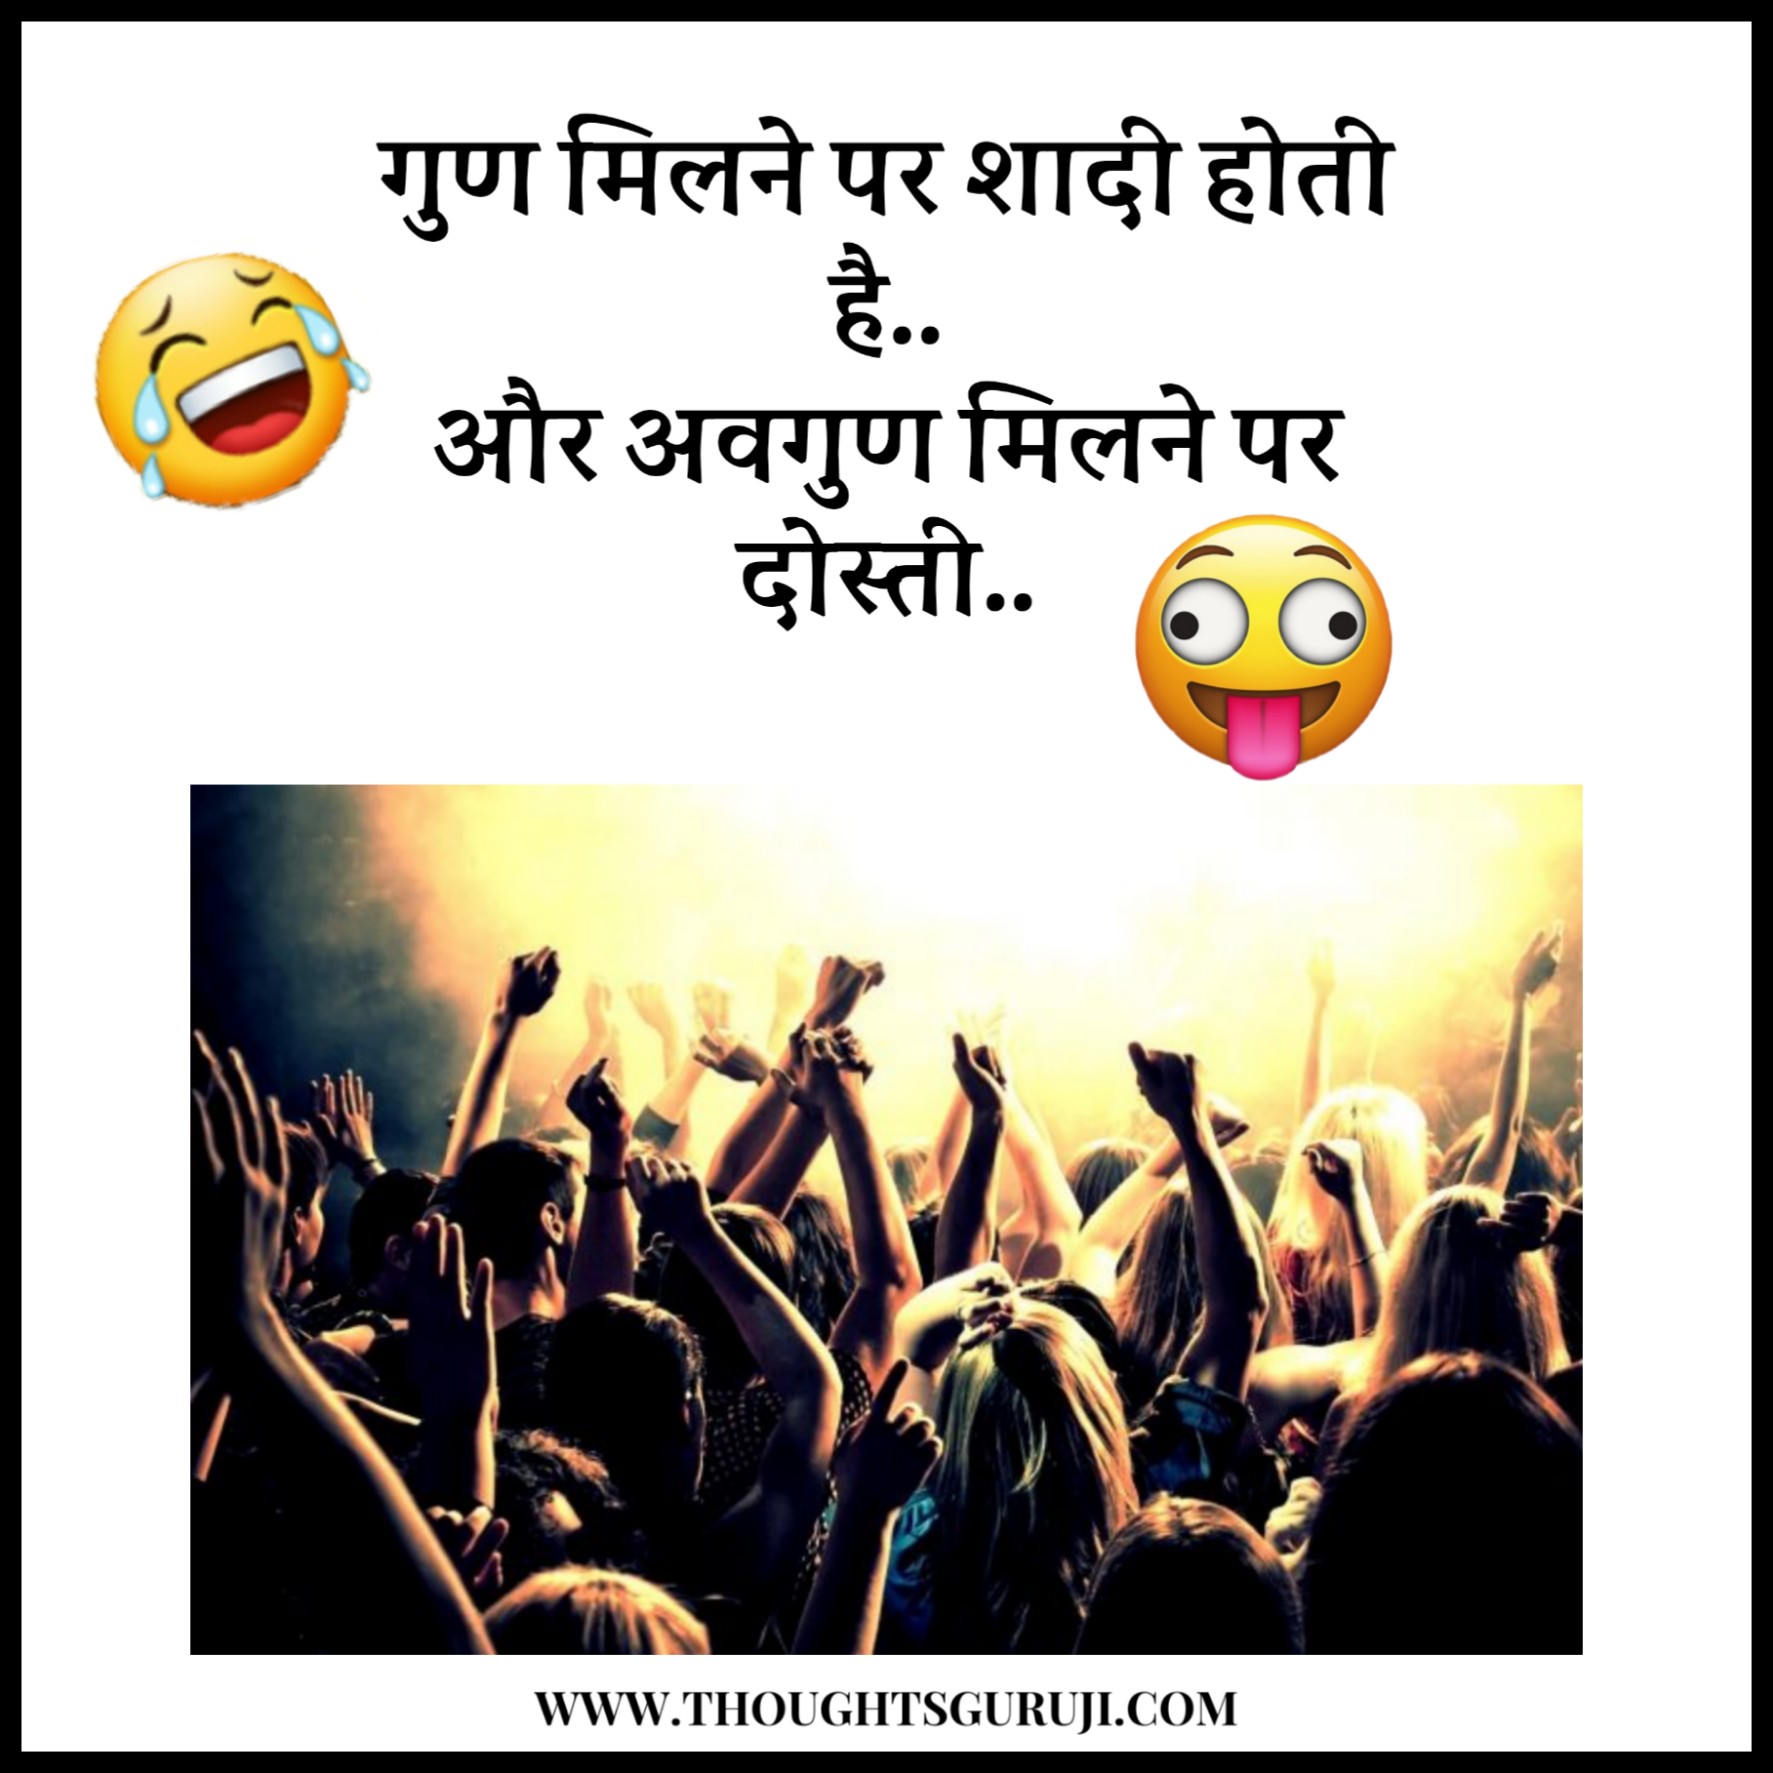 50+ Best Friendship Quotes in Hindi with Images | दोस्ती पर शायरी